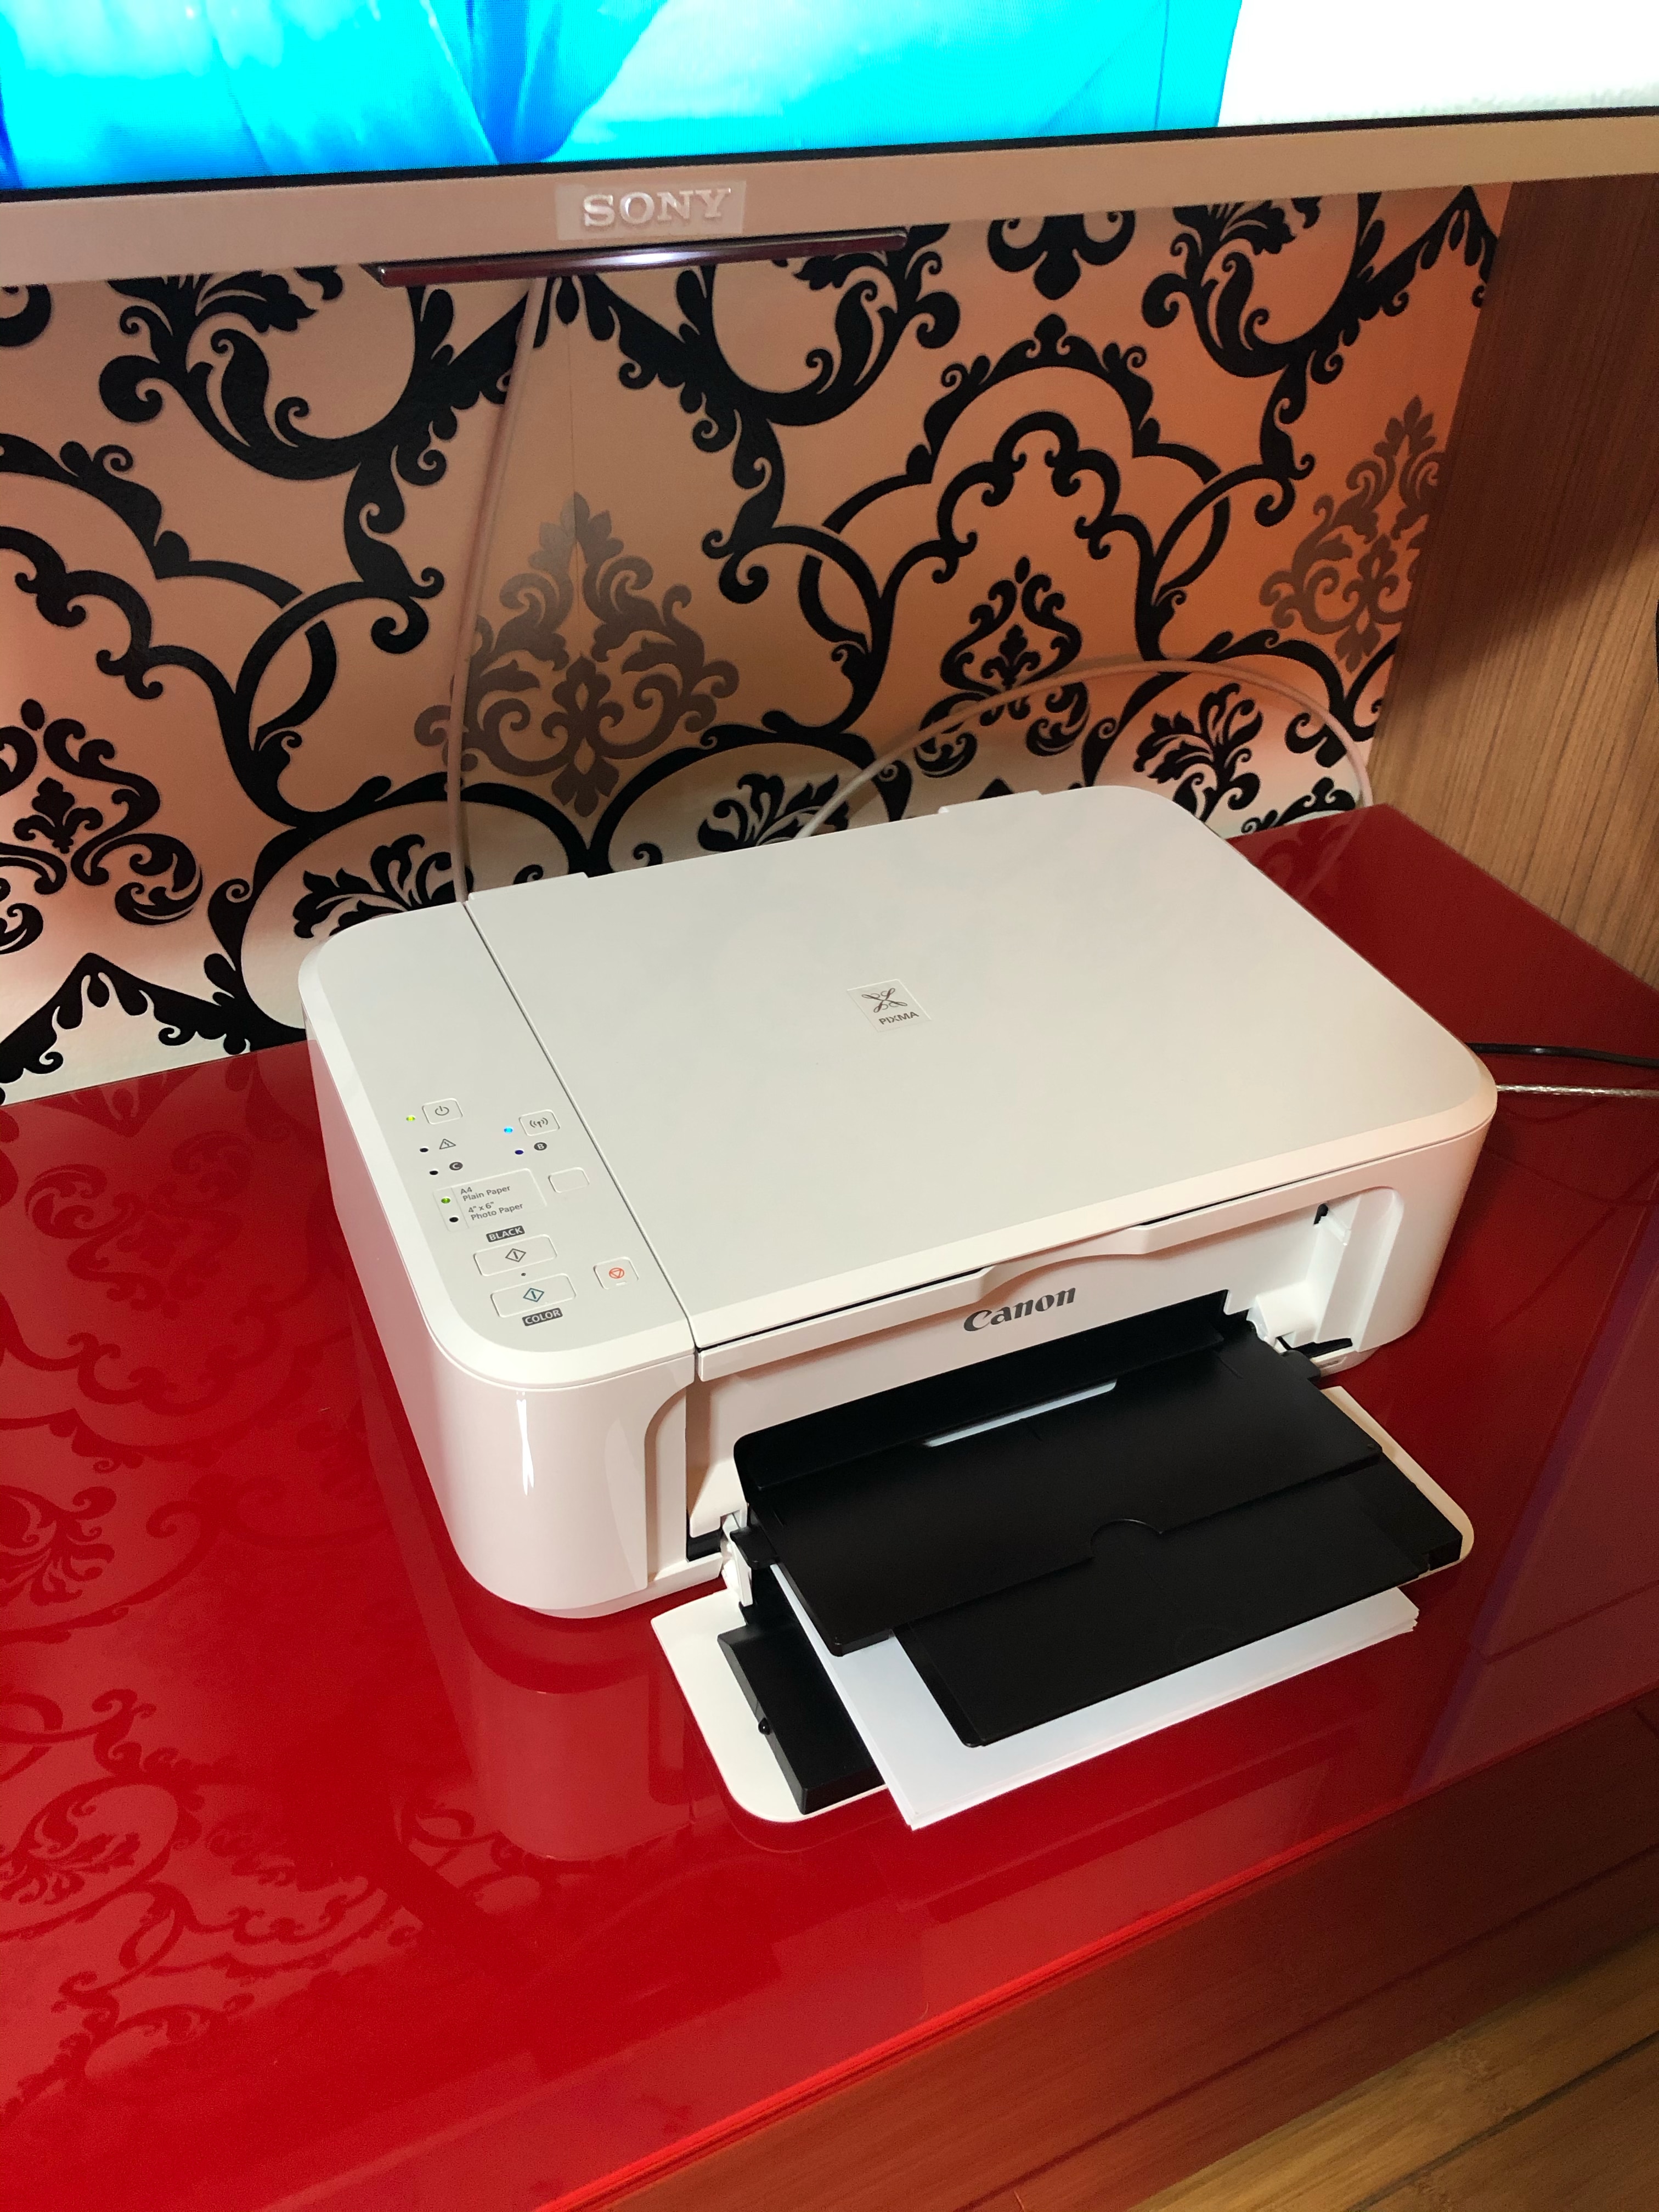 how to use scanner on canon printer mg2520